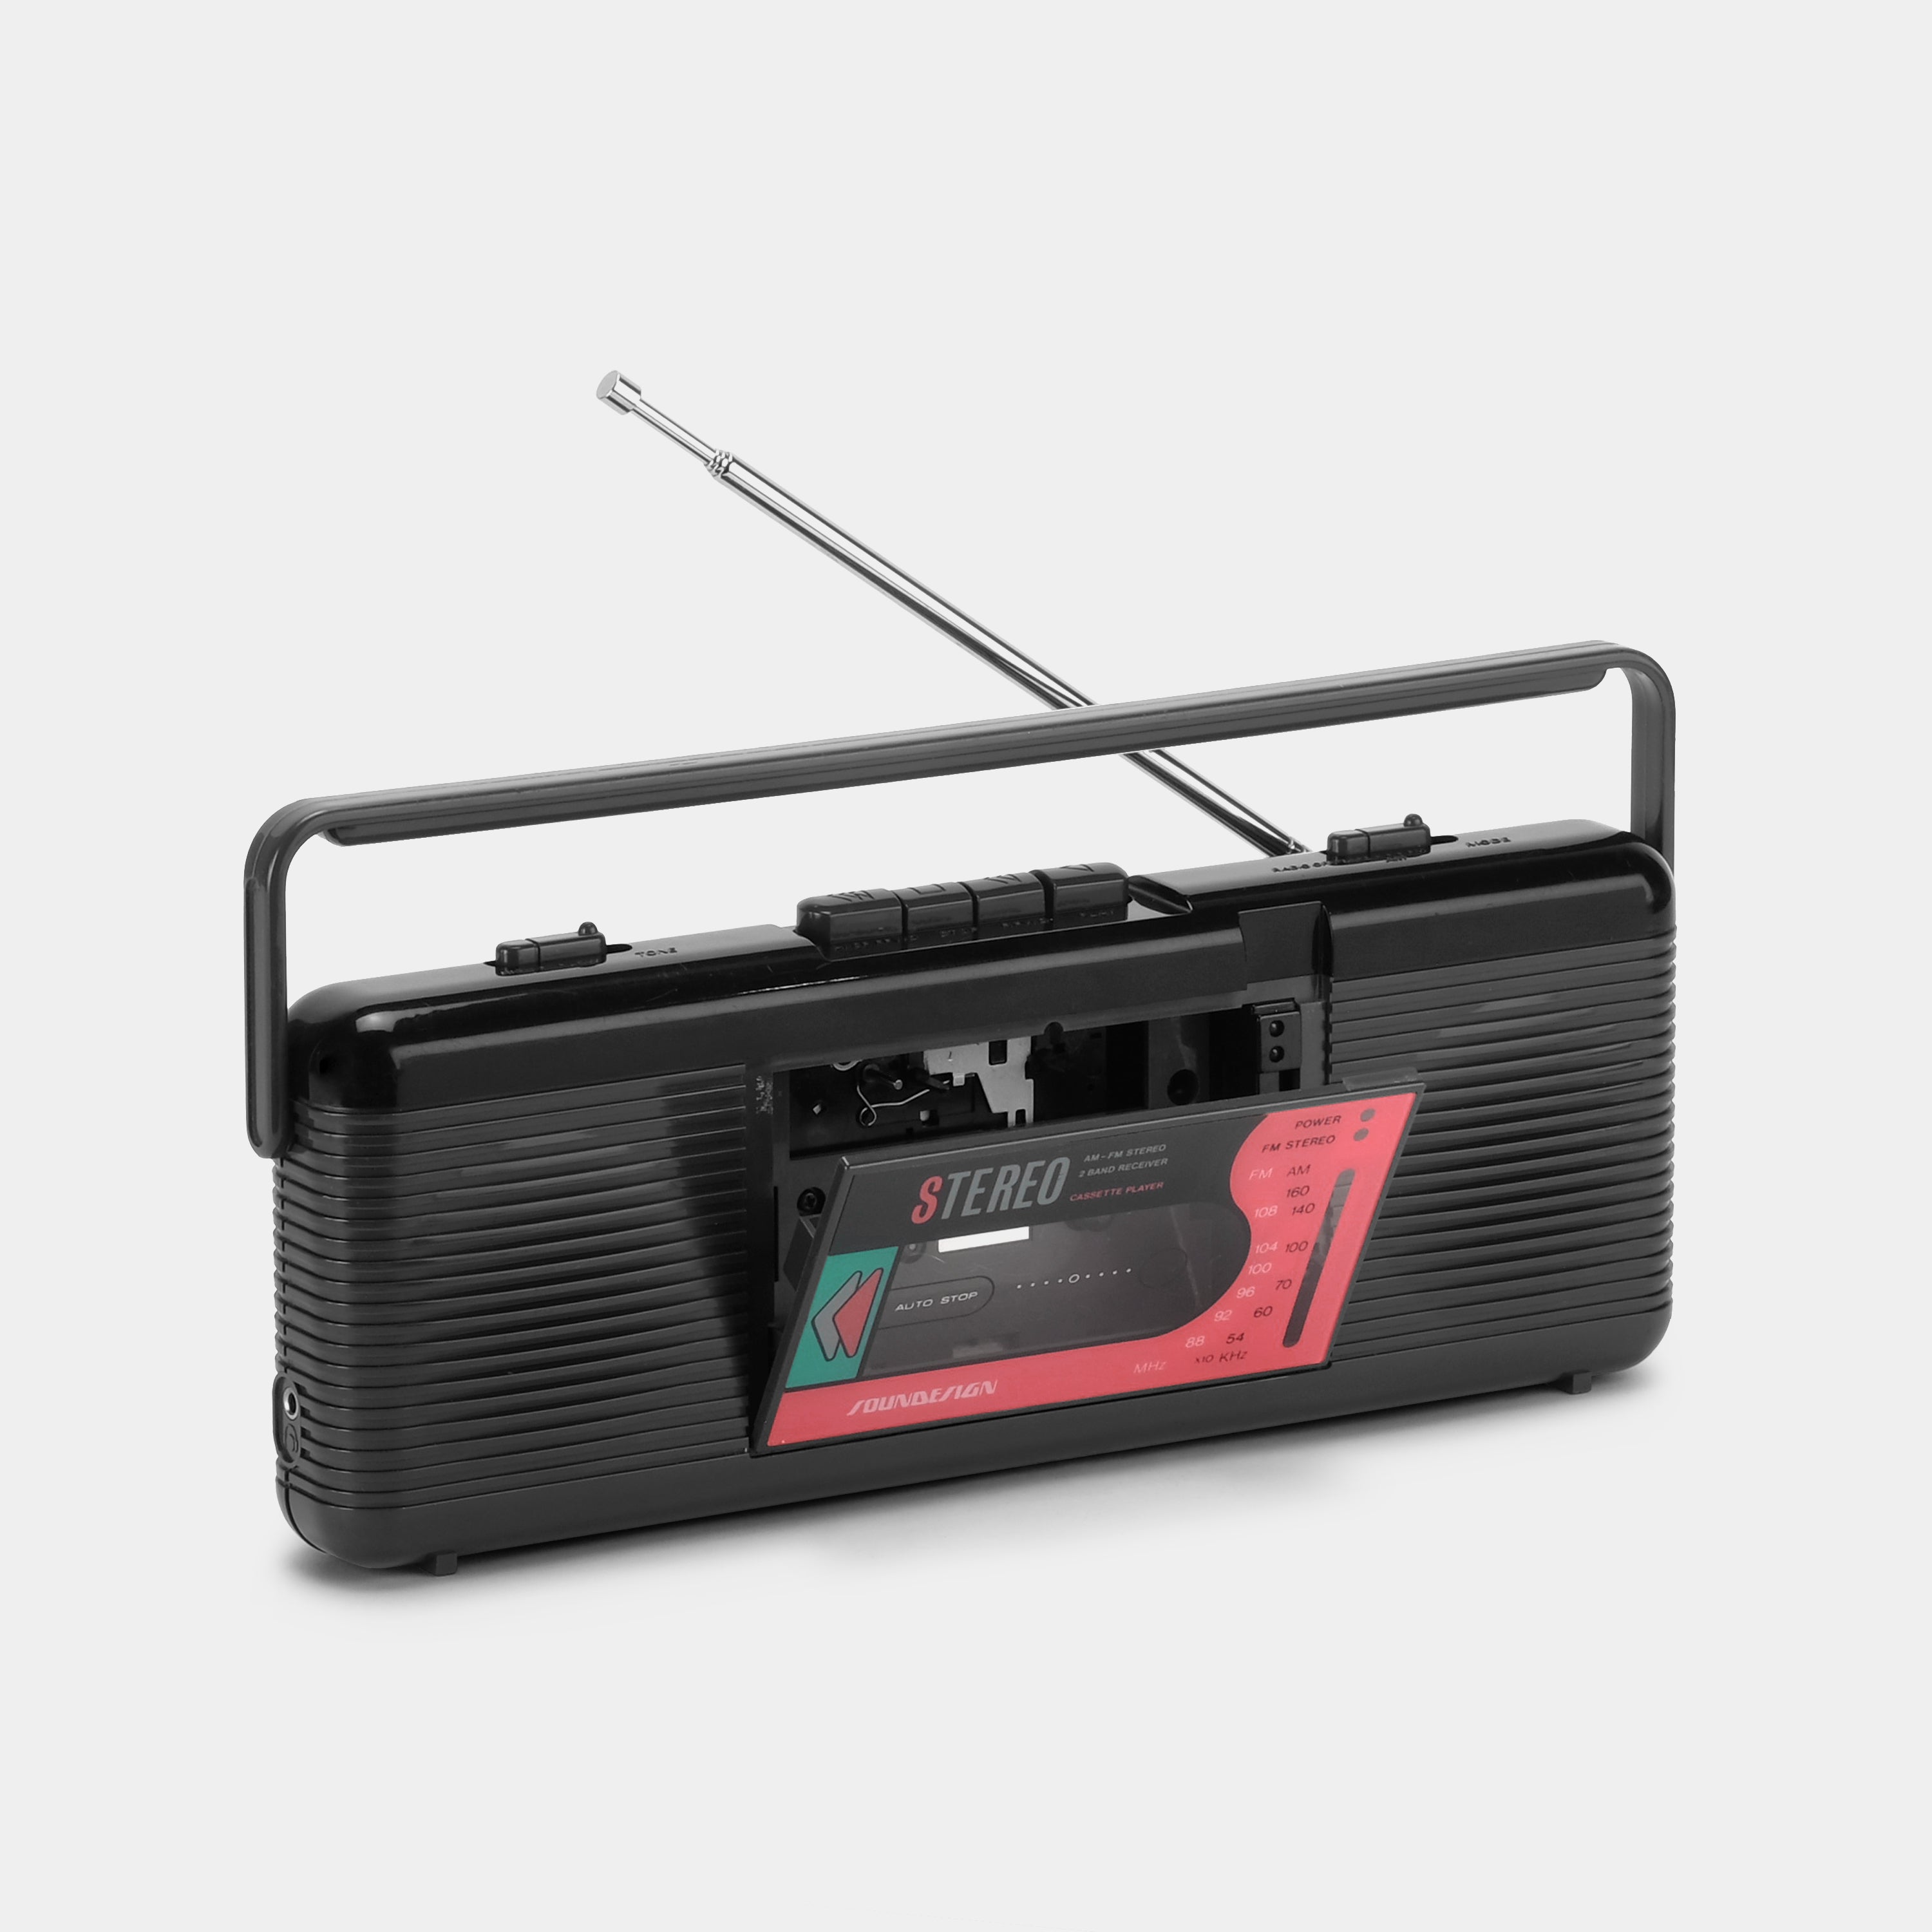 Soundesign 4611 AM/FM Stereo Boombox Cassette Player